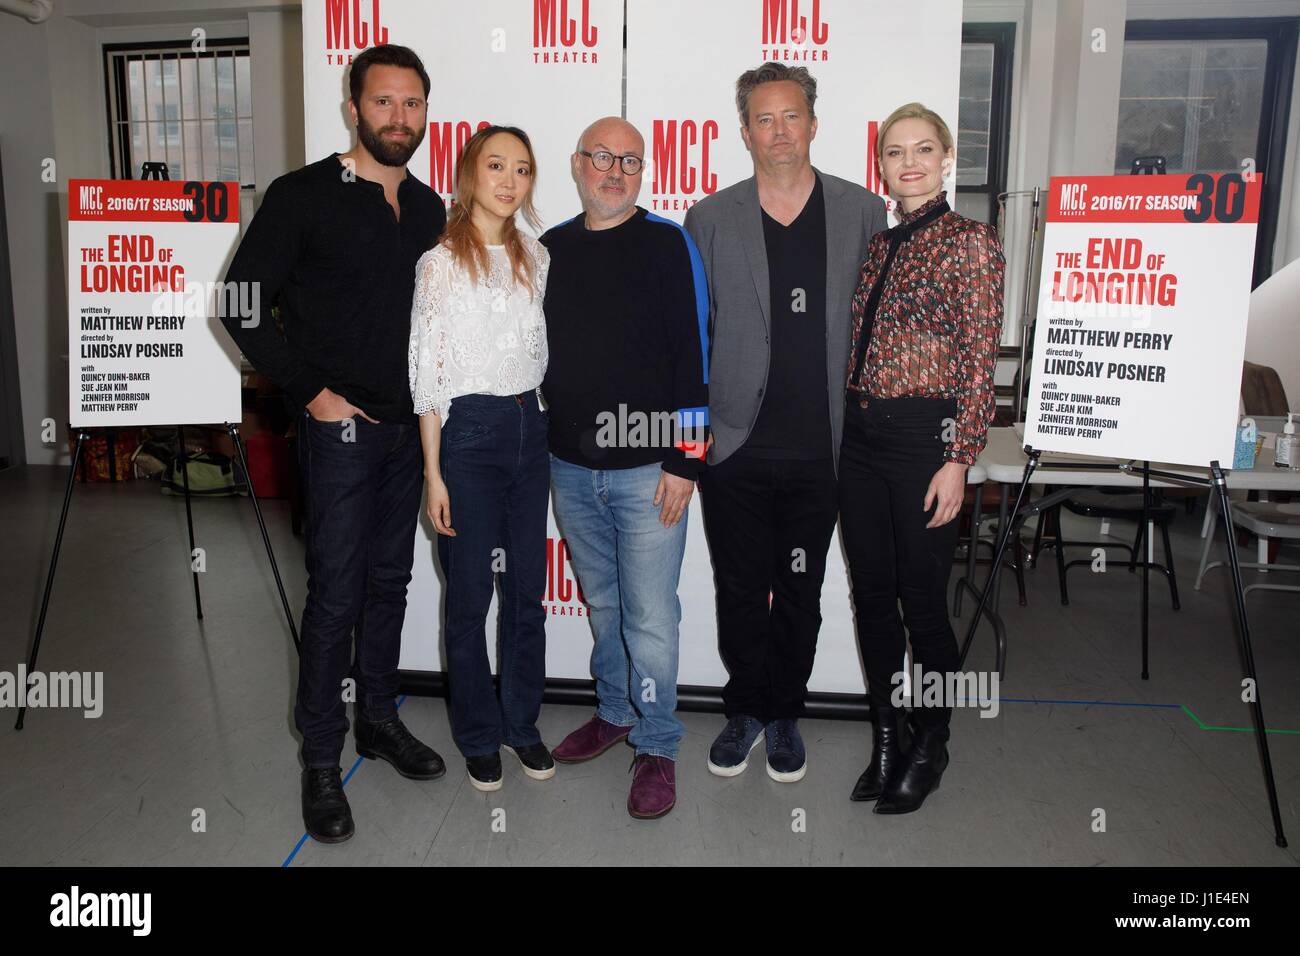 New York, NY, USA. 20th Apr, 2017. Quincy Dunn-Baker, Sue Jean Kim, Lindsay Posner, Matthew Perry, Jennifer Morrison in attendance for MCC Theater's THE END OF LONGING Cast Meet and Greet, Roundabout Studios, New York, NY April 20, 2017. Credit: Jason Smith/Everett Collection/Alamy Live News Stock Photo